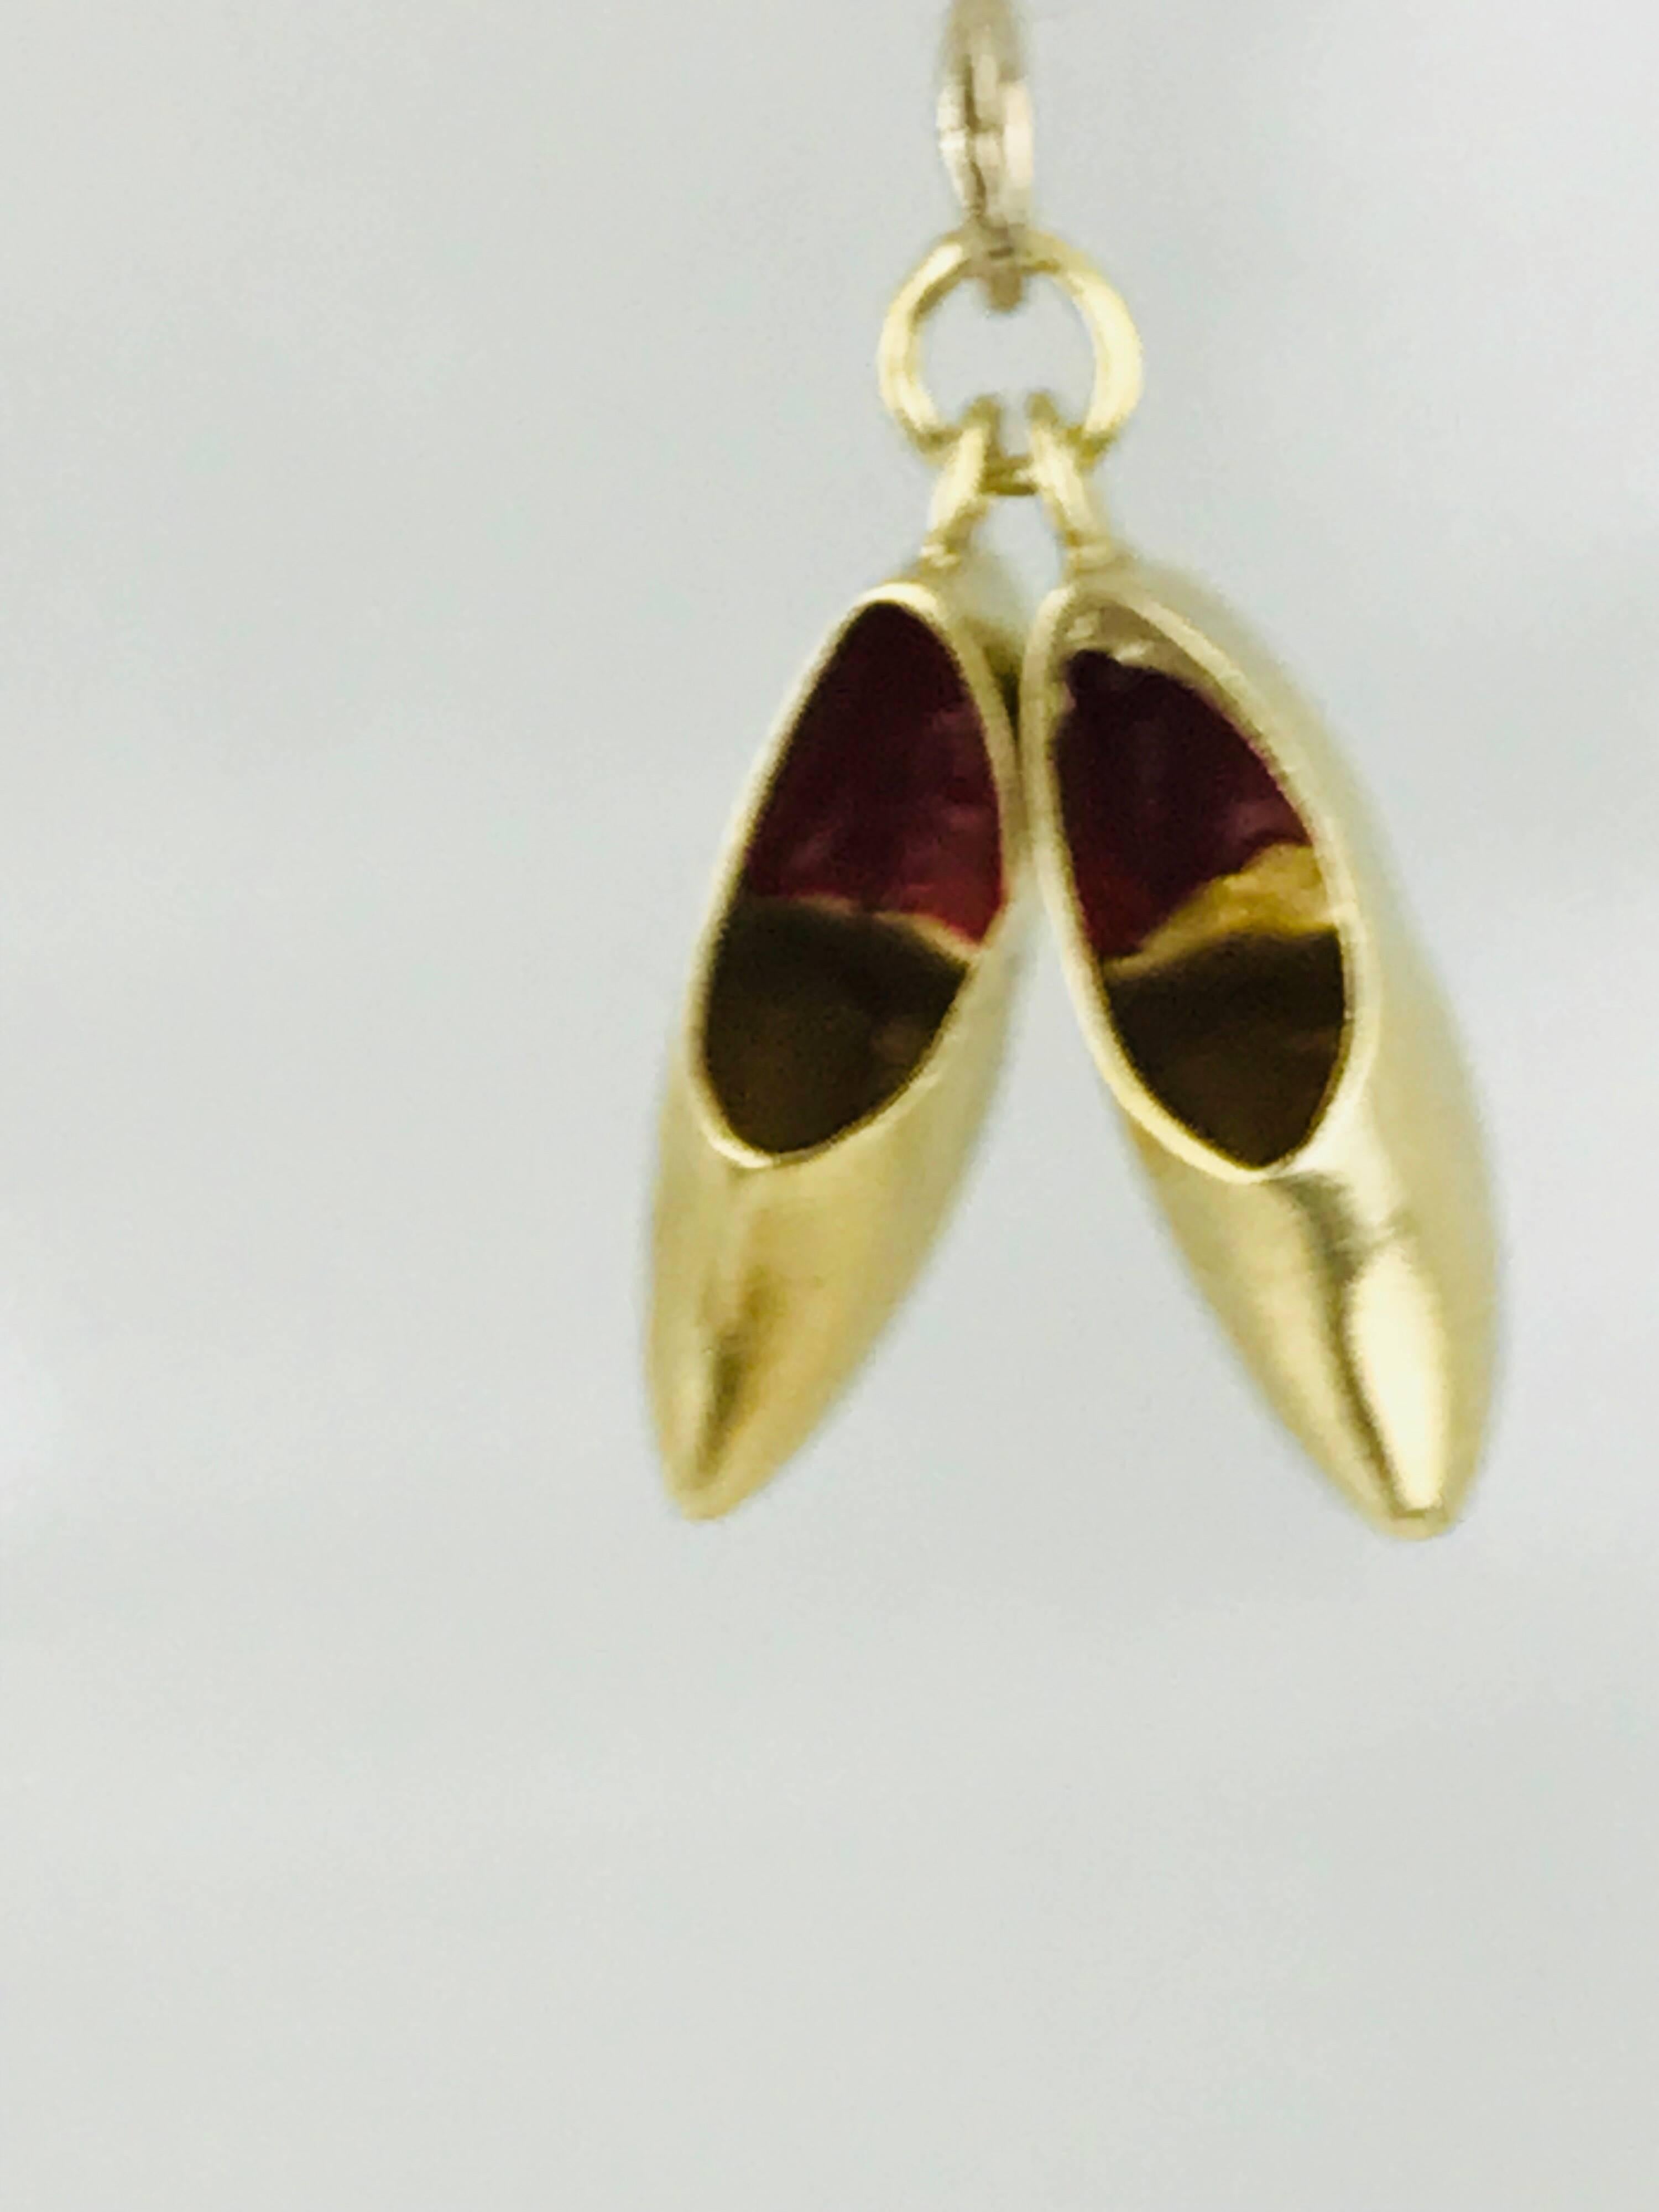 Dutch Shoes with Red Enamel, Charm or Pendant 18 Karat Yellow Gold, circa 1950 For Sale 1